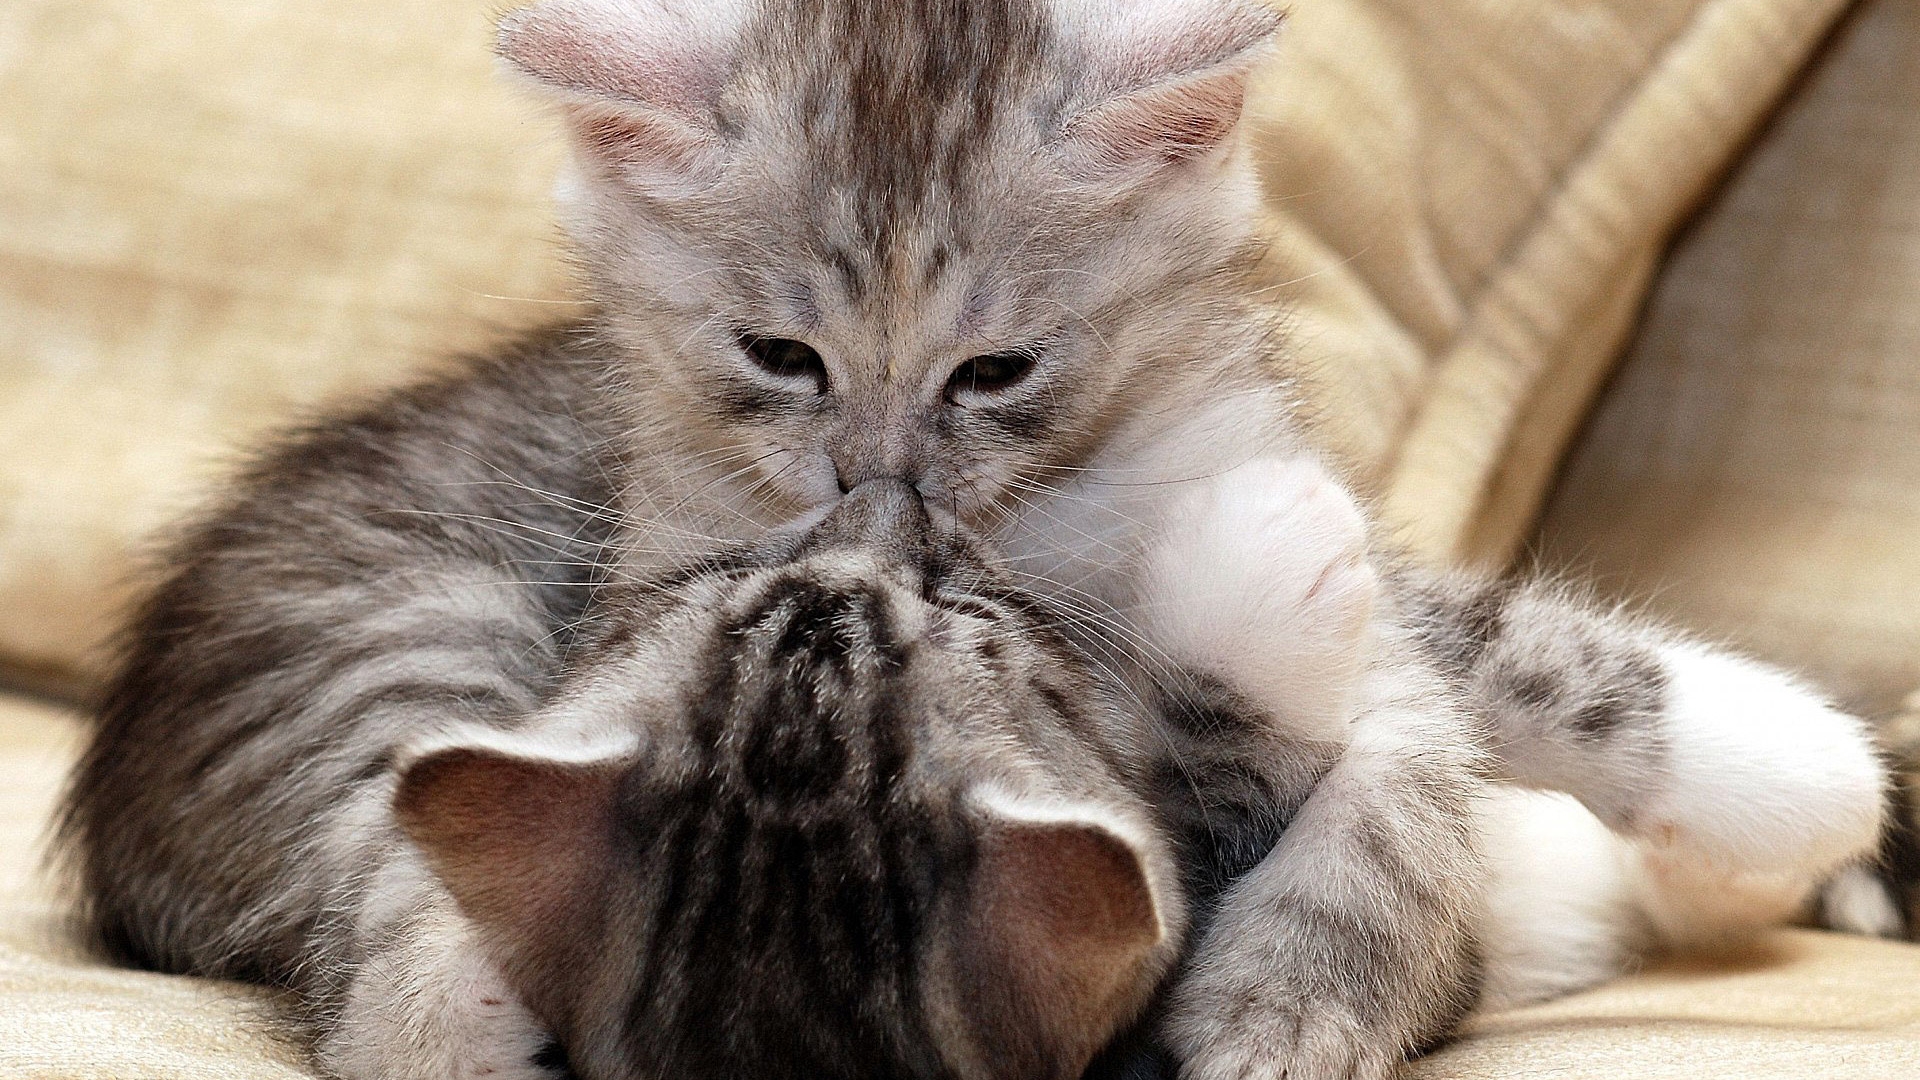 Kitty Kiss for 1920 x 1080 HDTV 1080p resolution